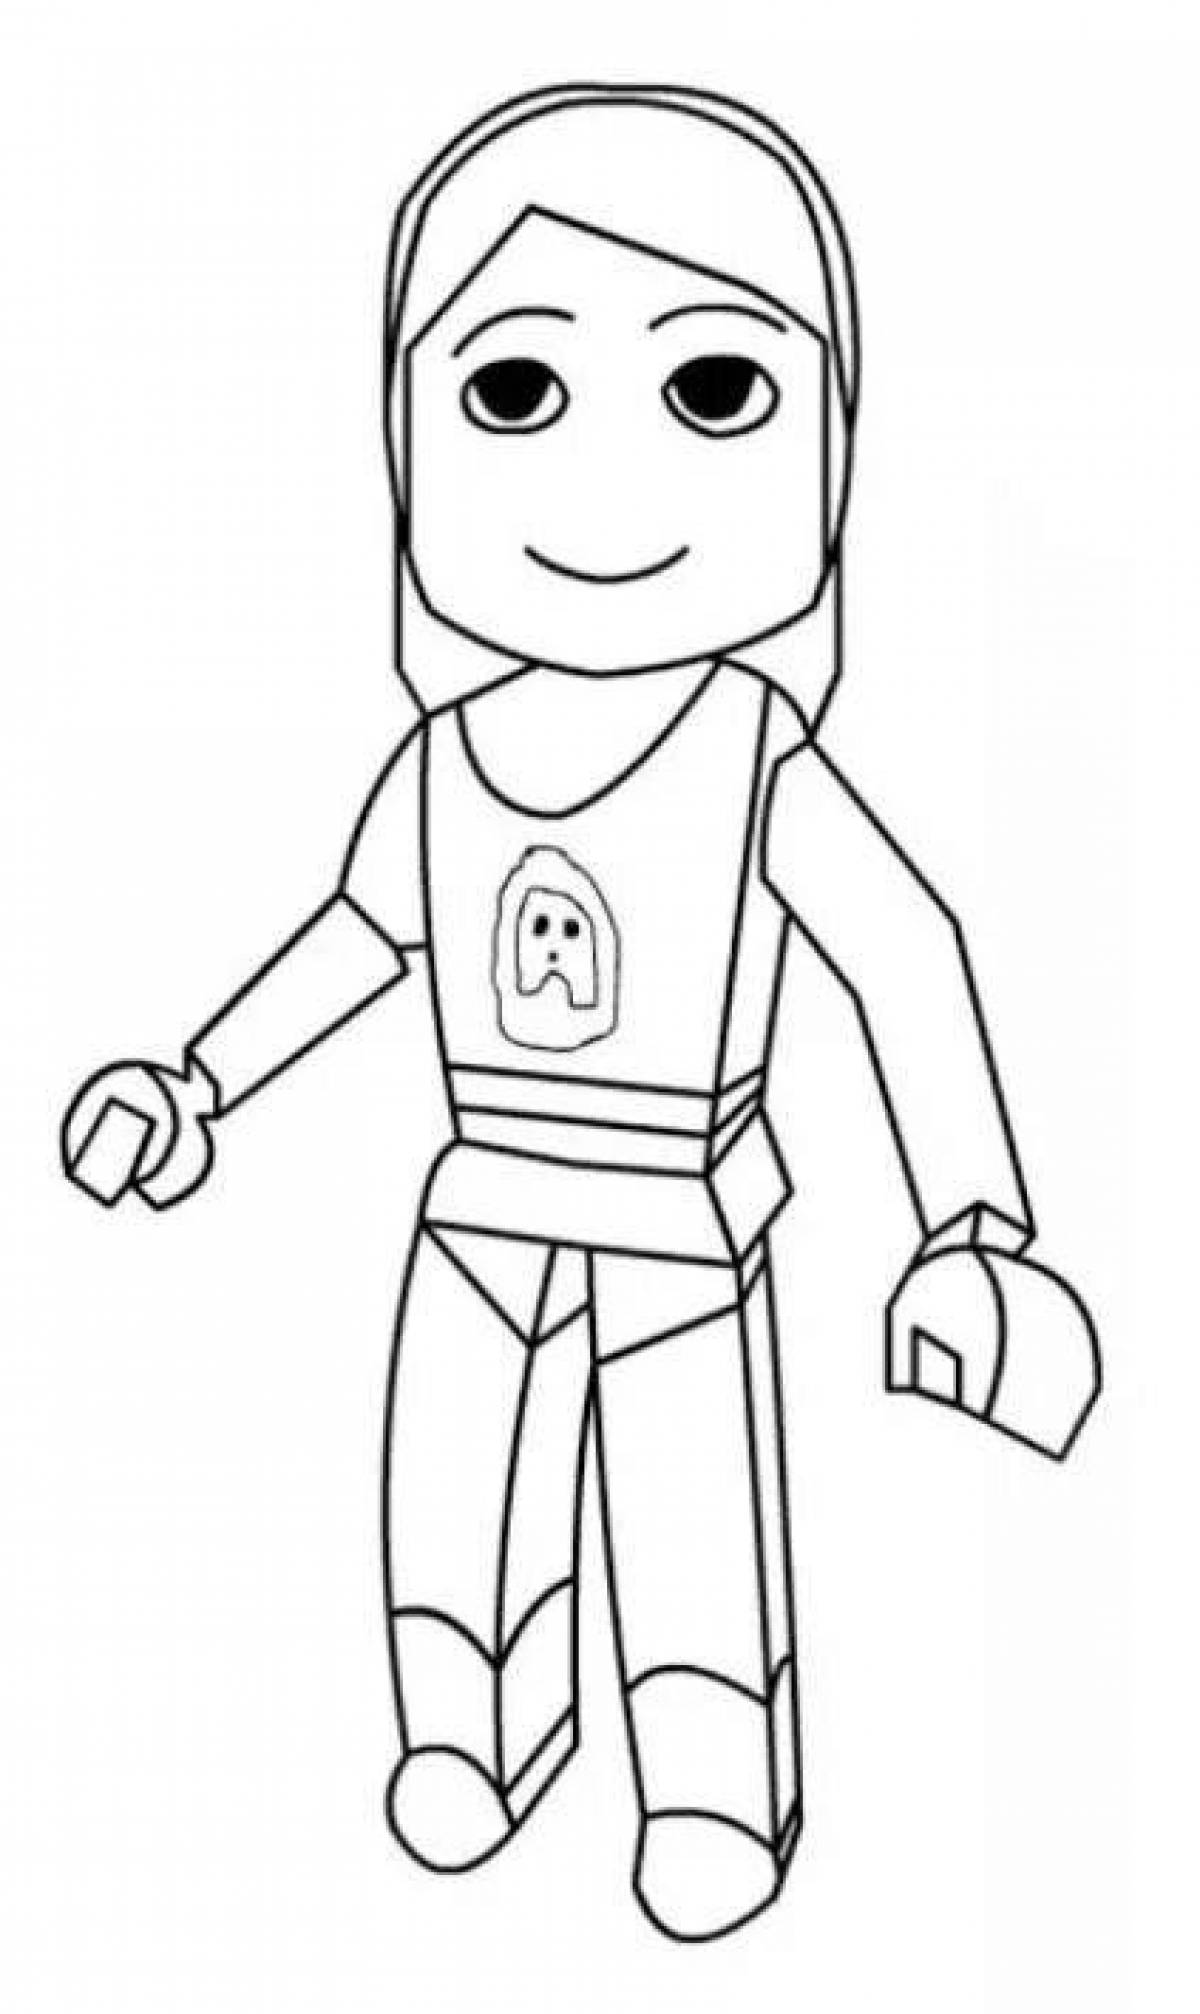 Colorful vibrant roblox player coloring page